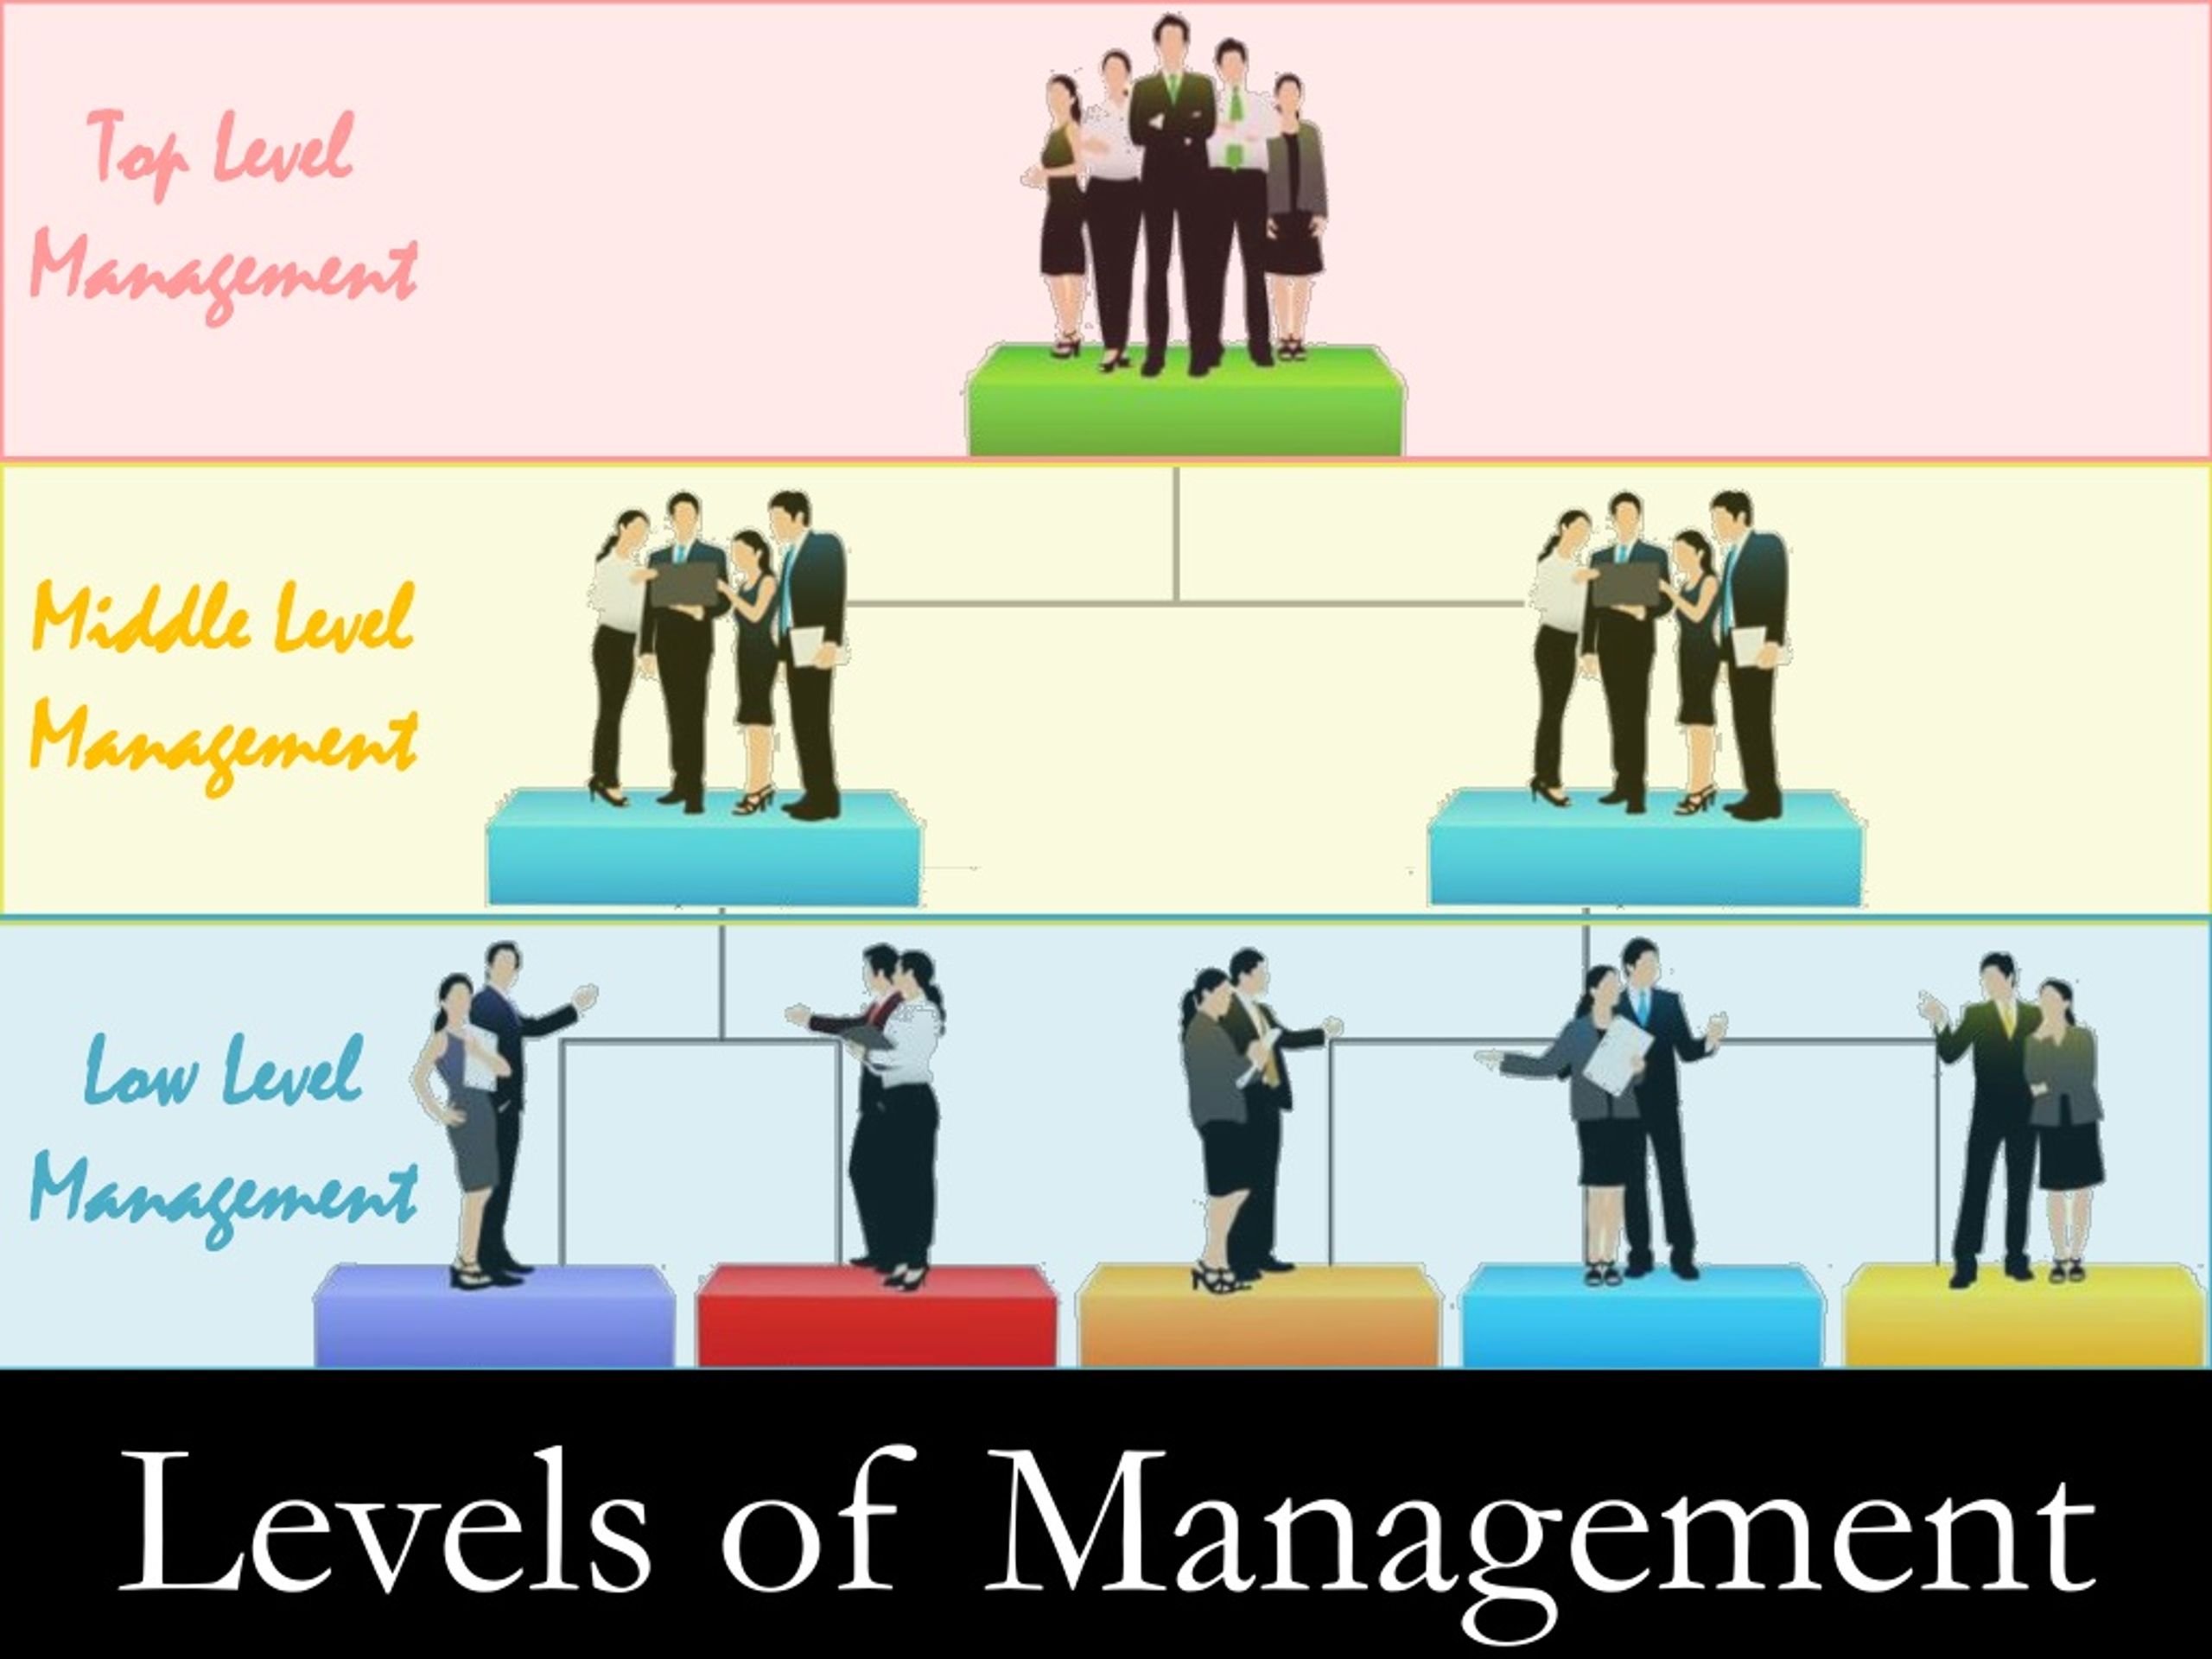 Level manager. Top Levels Managers. Low, Middle, Top менеджеры. Топ левел. Middle Management.